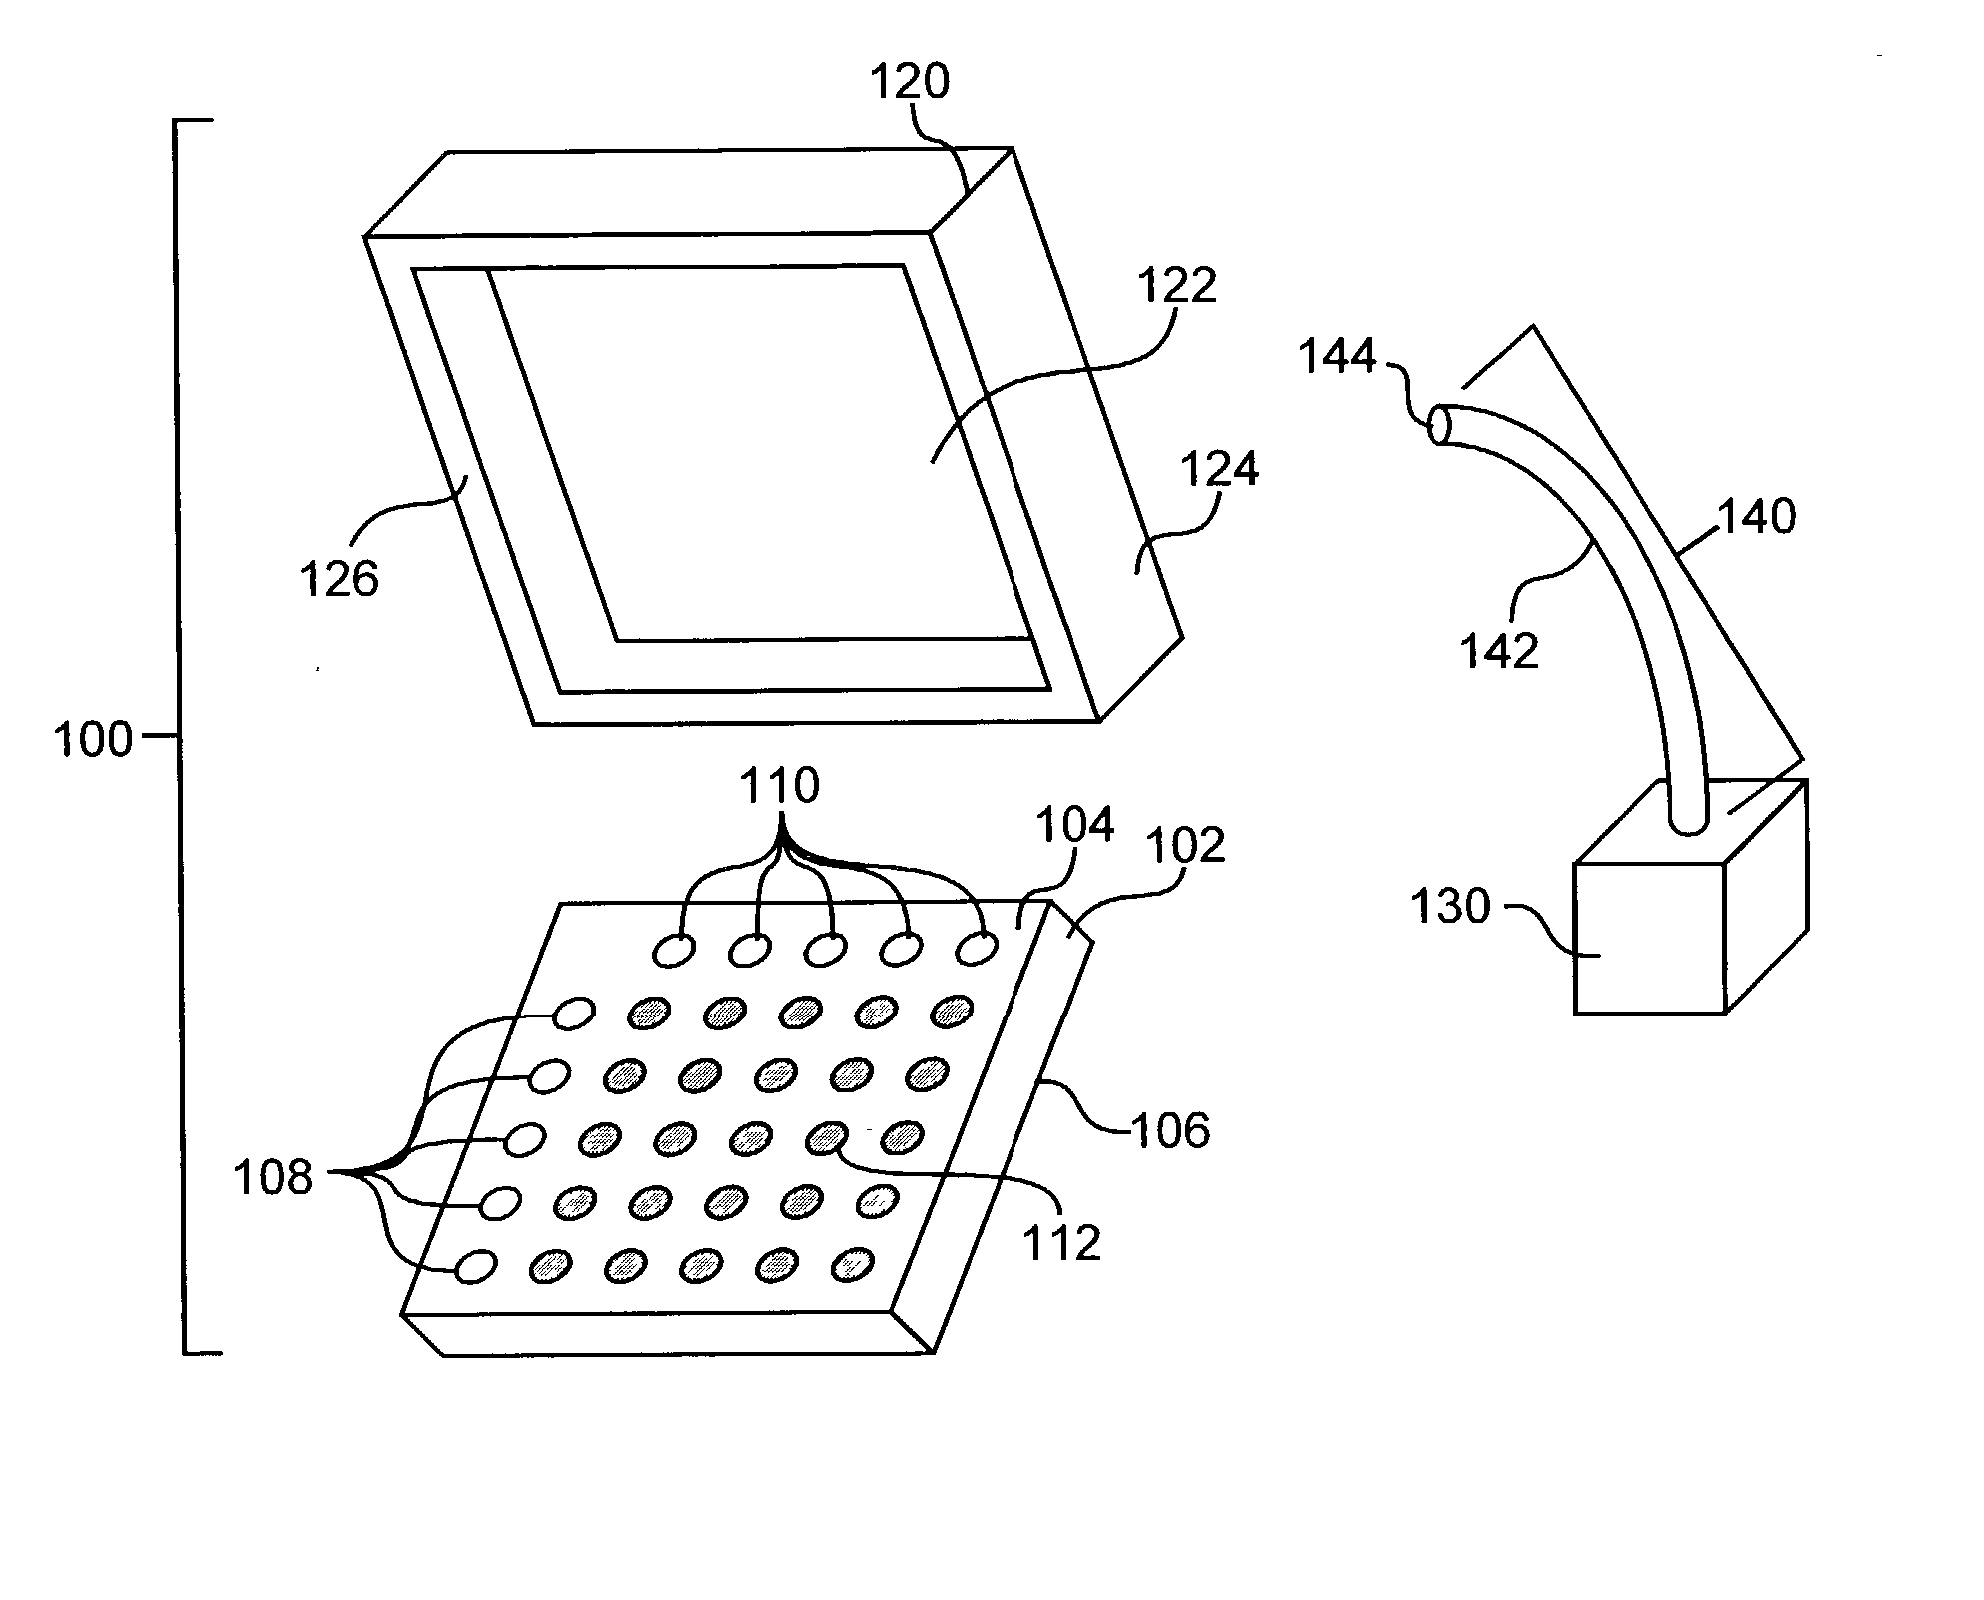 Optical microfluidic devices and methods